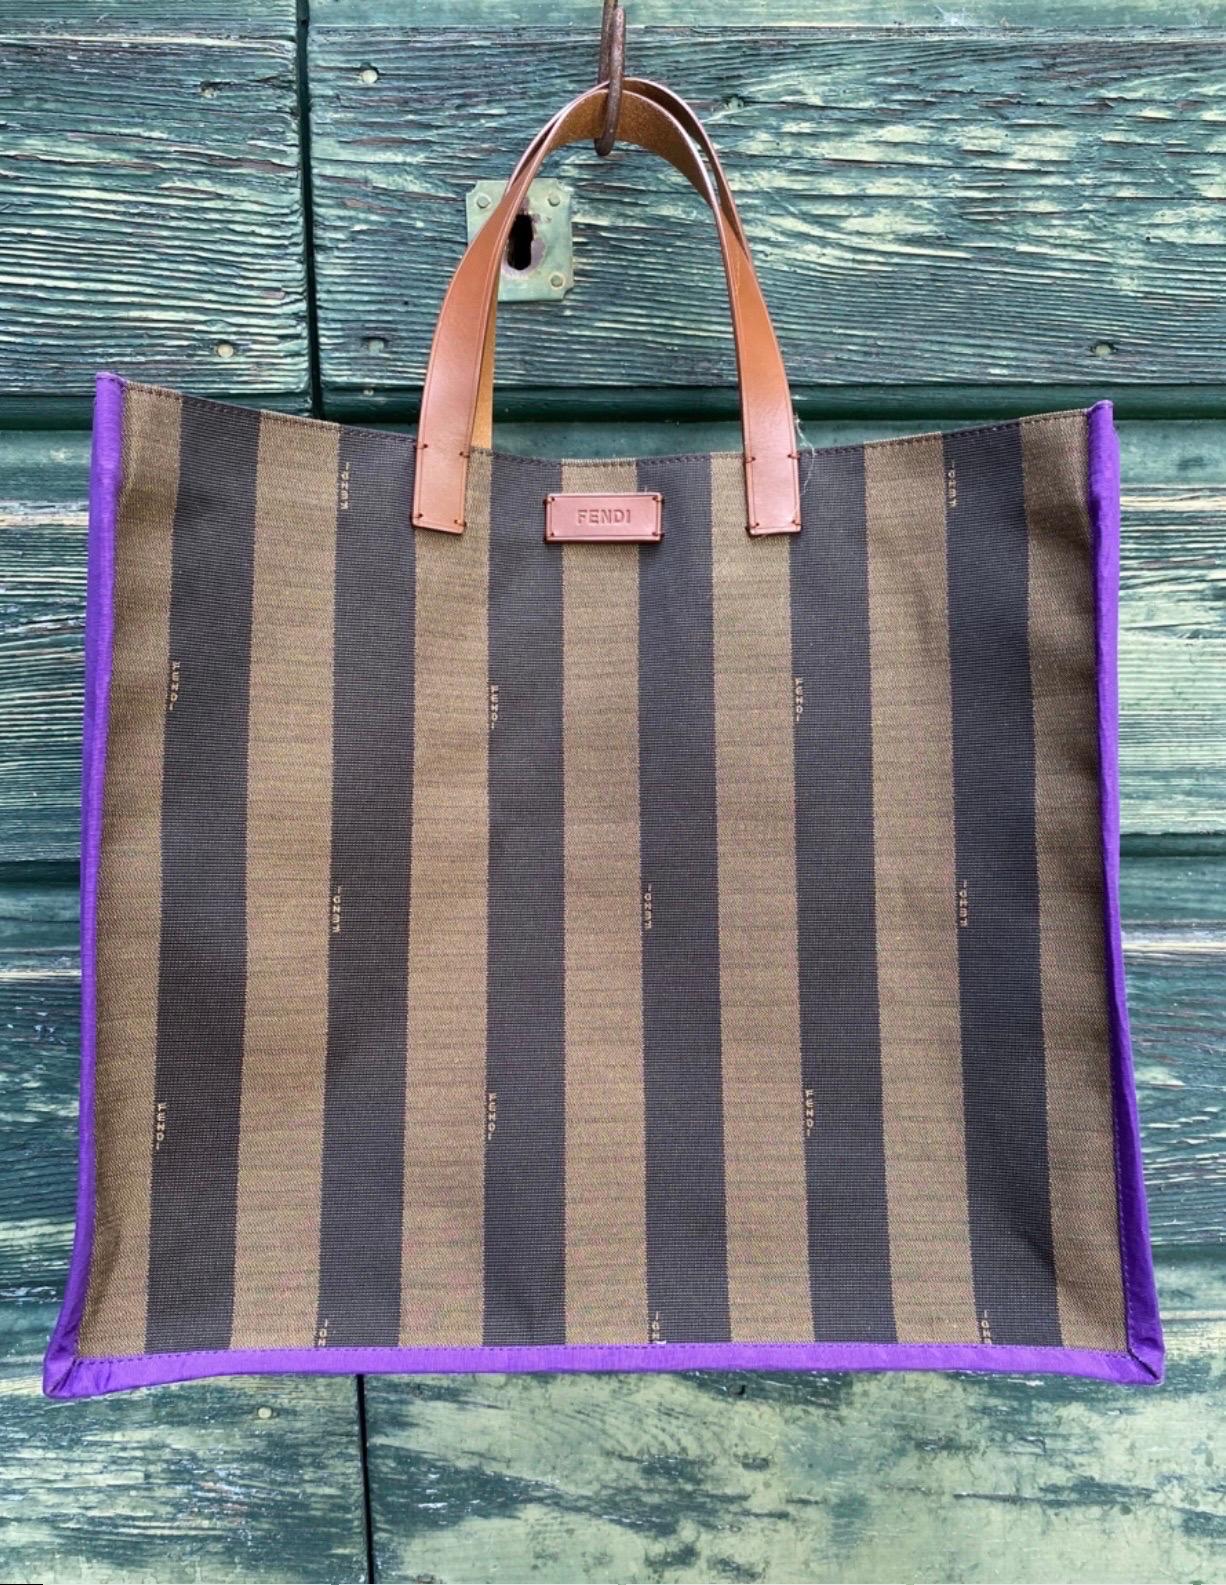 Fendi shopper. 
In cotton. Classic Fendi colours, with purple bottom sides, interior in plastic, with brown leather handles. Measurements: length 34cm, height 38cm, thickness 20cm, handle height 16cm, in very good condition.